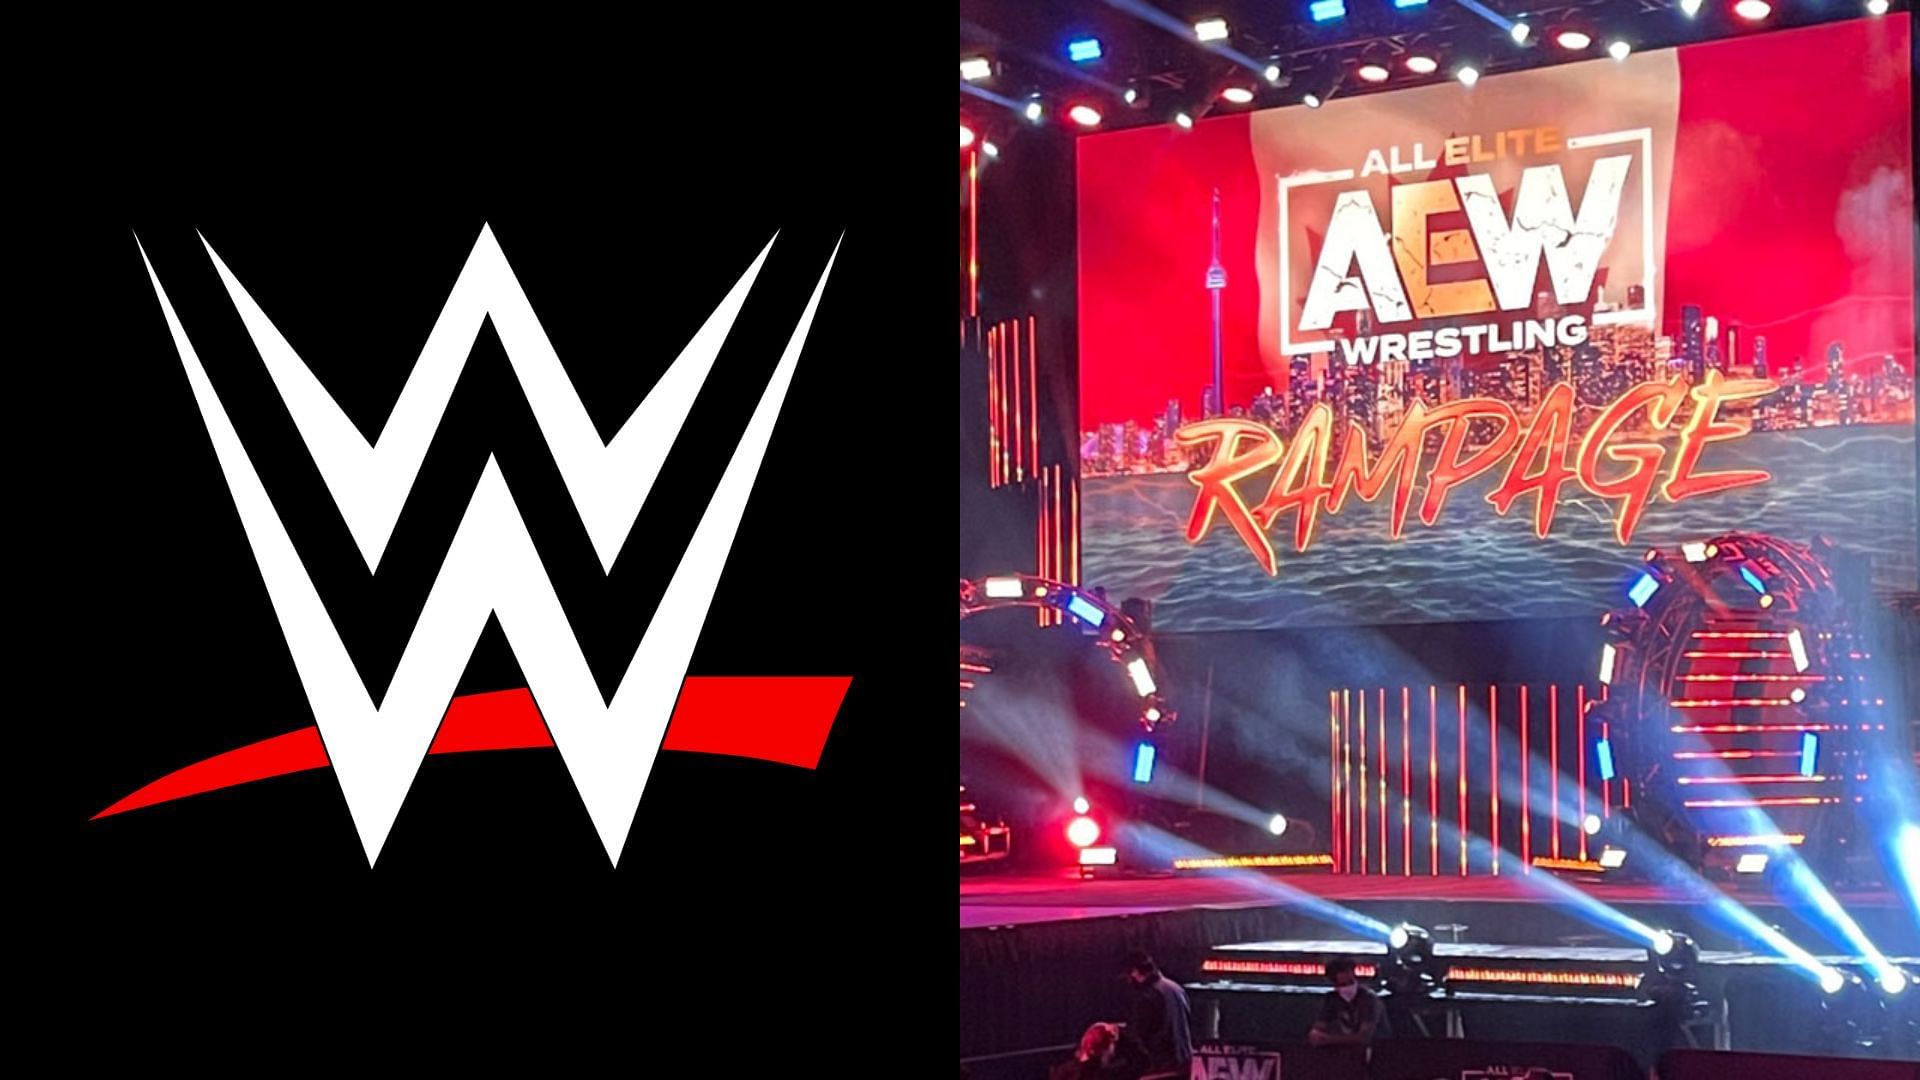 Could these stars sign with AEW after this appearance?